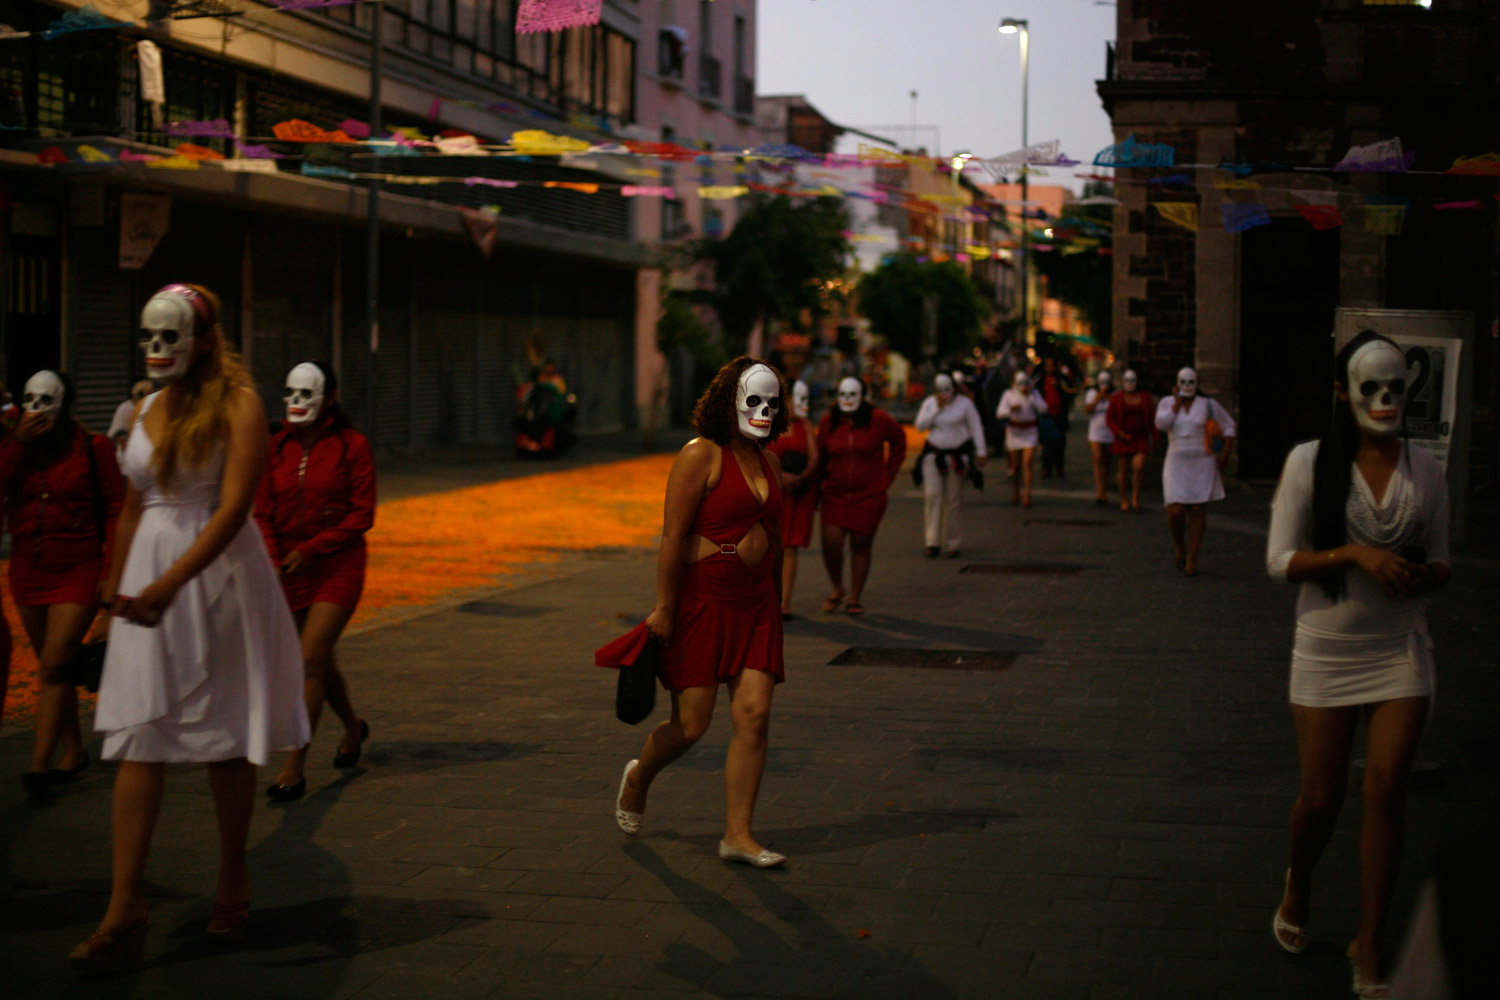 October 29, 2011. Sex workers wearing skeleton masks, which represent the Day of the Dead, participate in a procession in Mexico City.